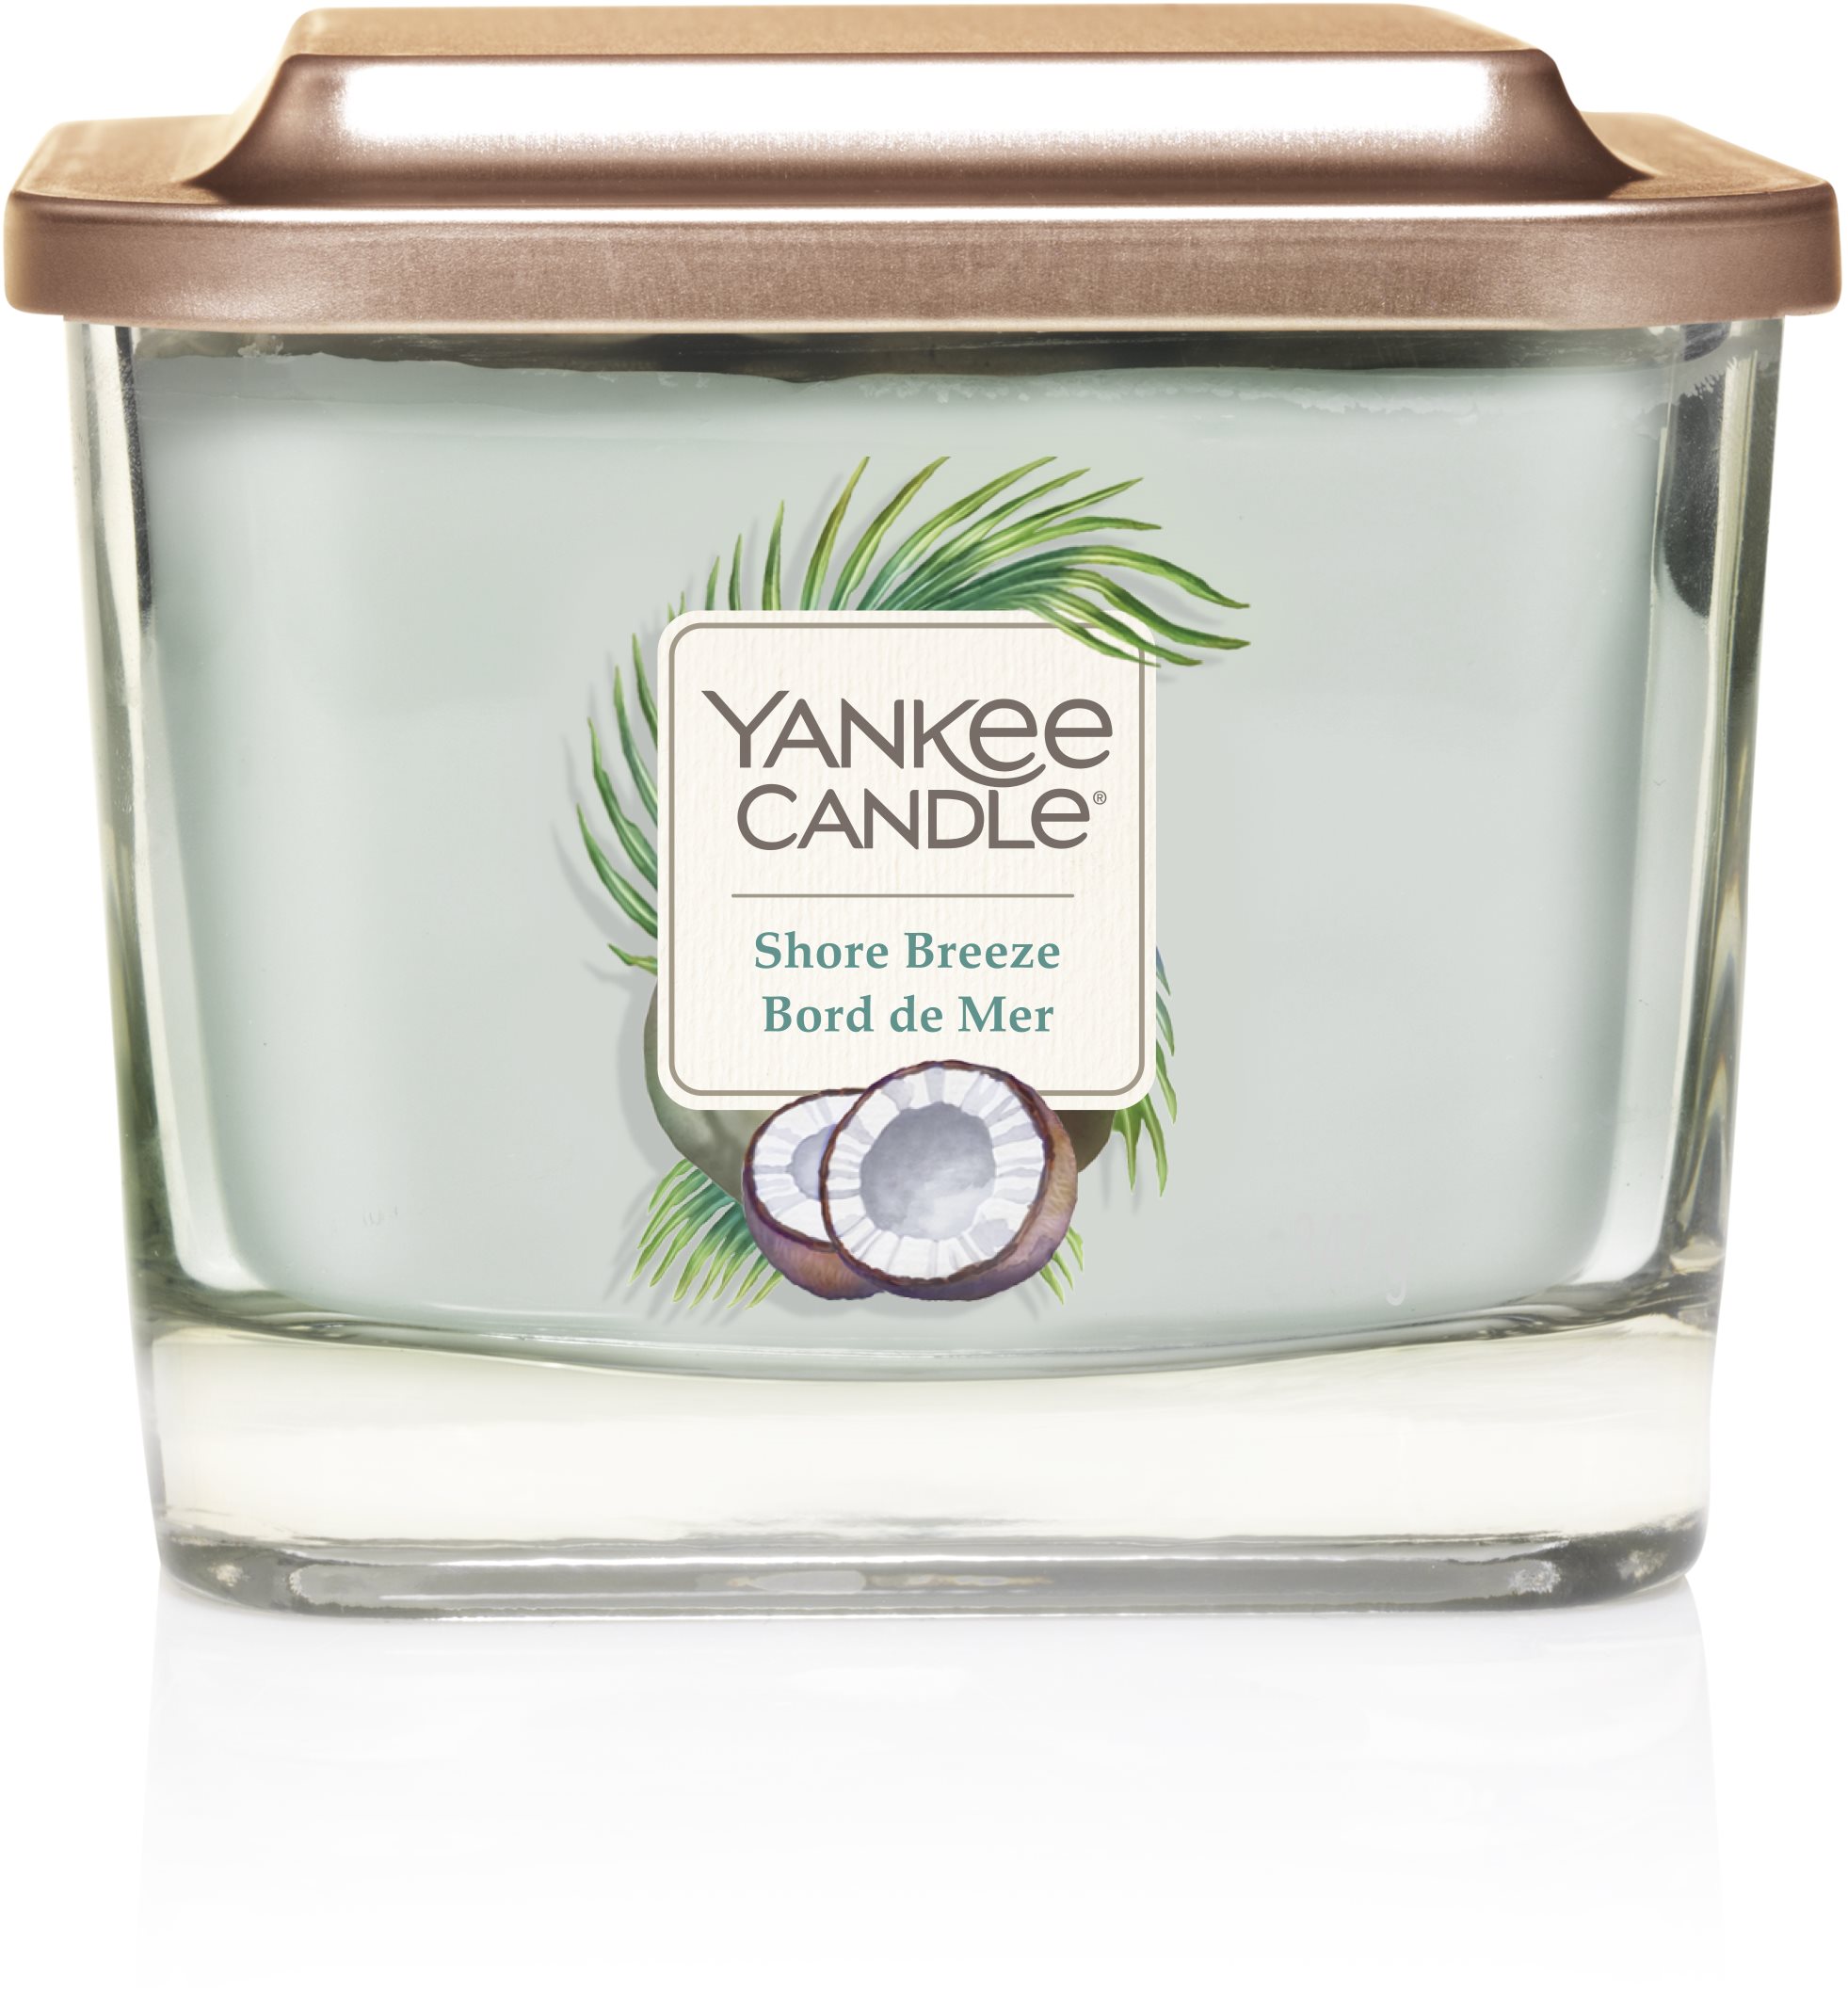 YANKEE CANDLE Shore Breeze